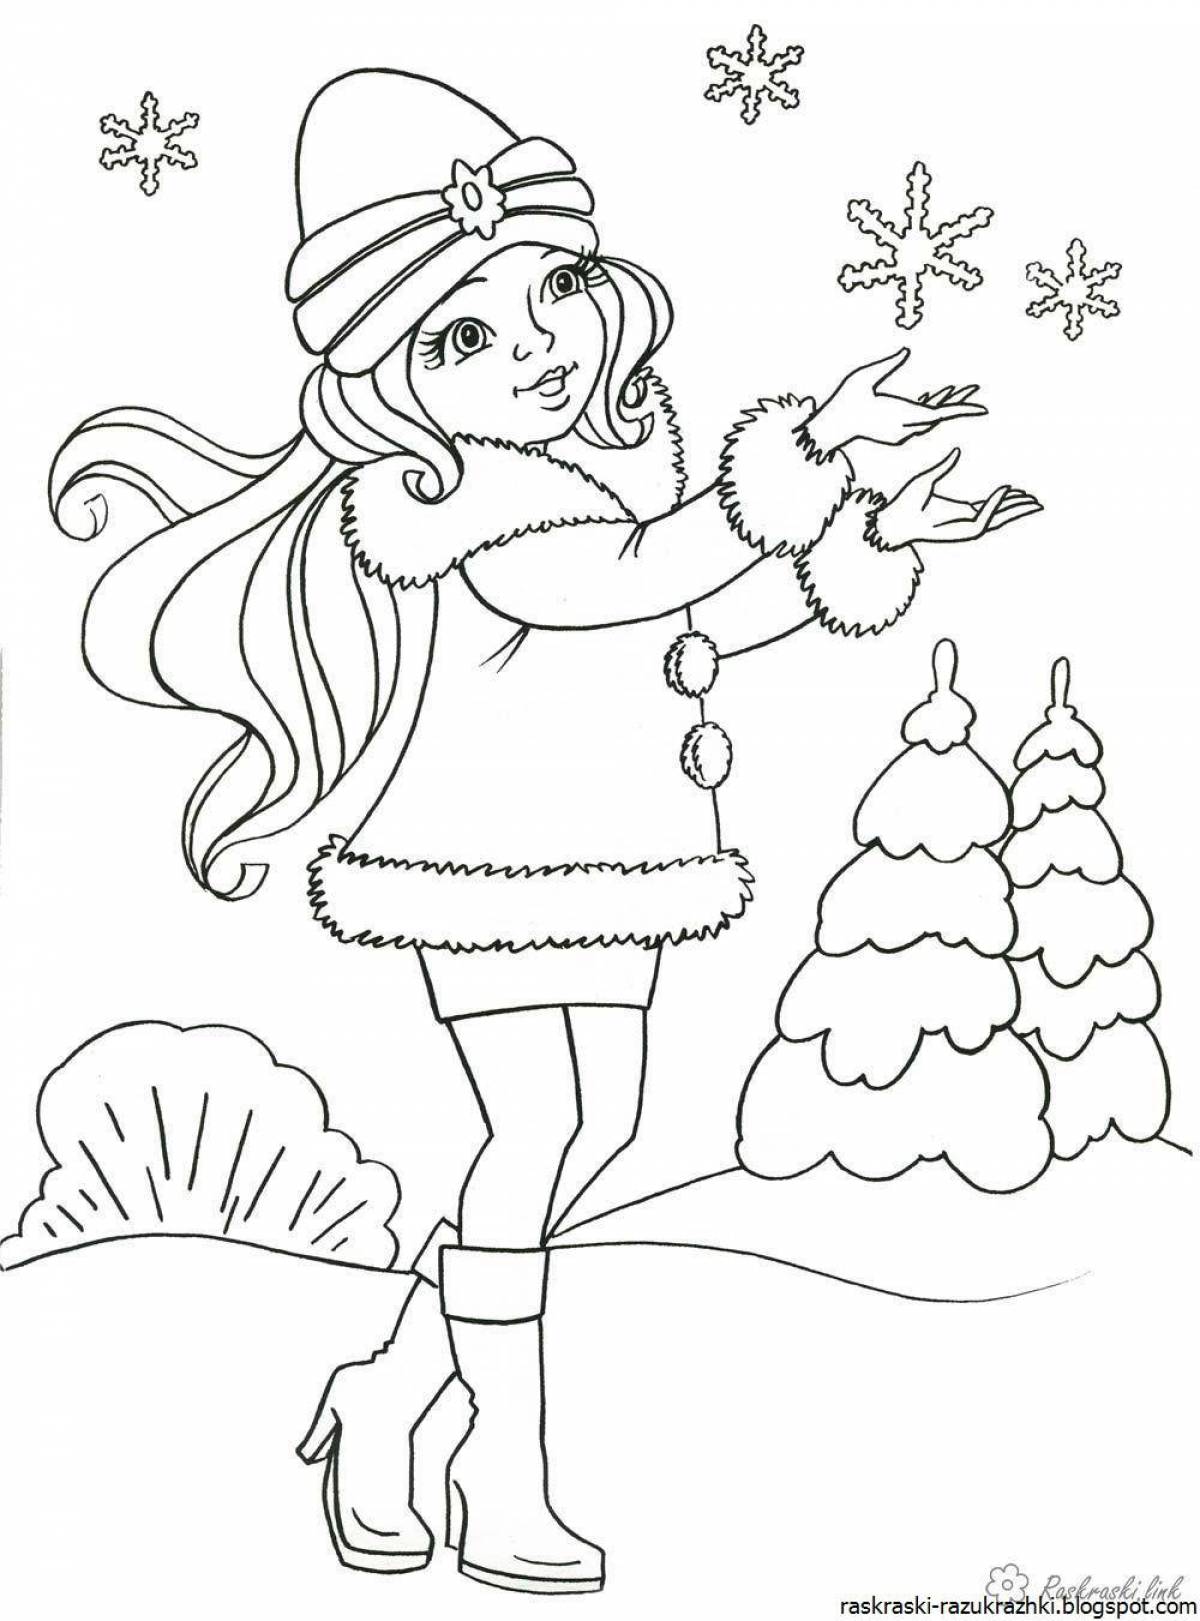 Exquisite winter coloring book for children 10 years old